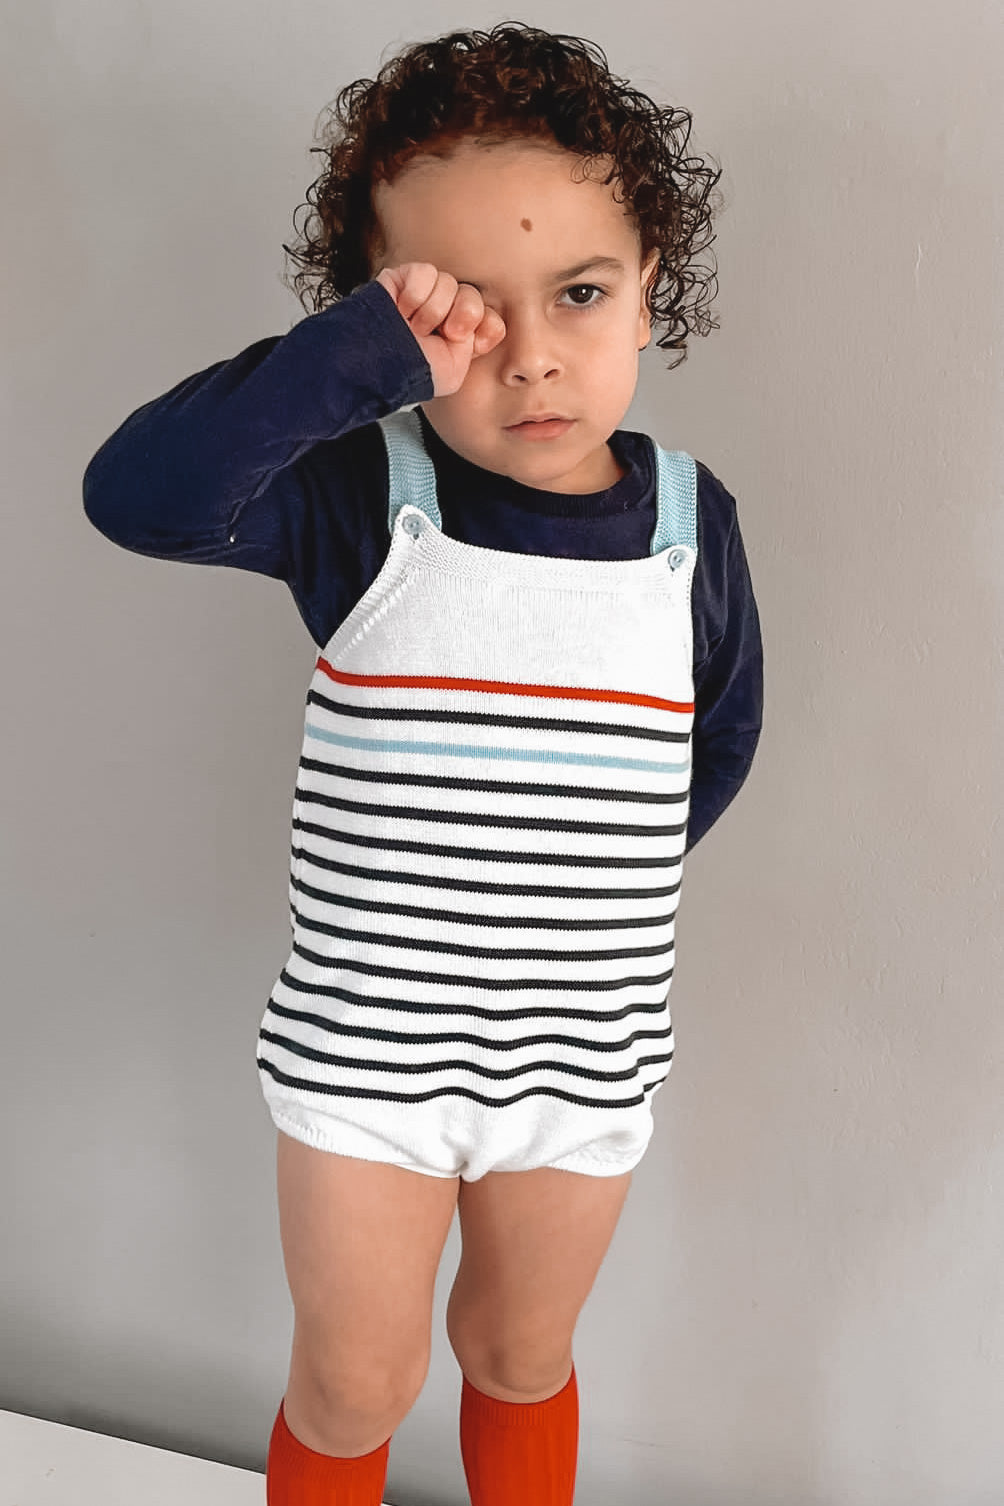 Granlei "Archer" Navy & Red Stripe Knit Dungaree Romper | iphoneandroidapplications